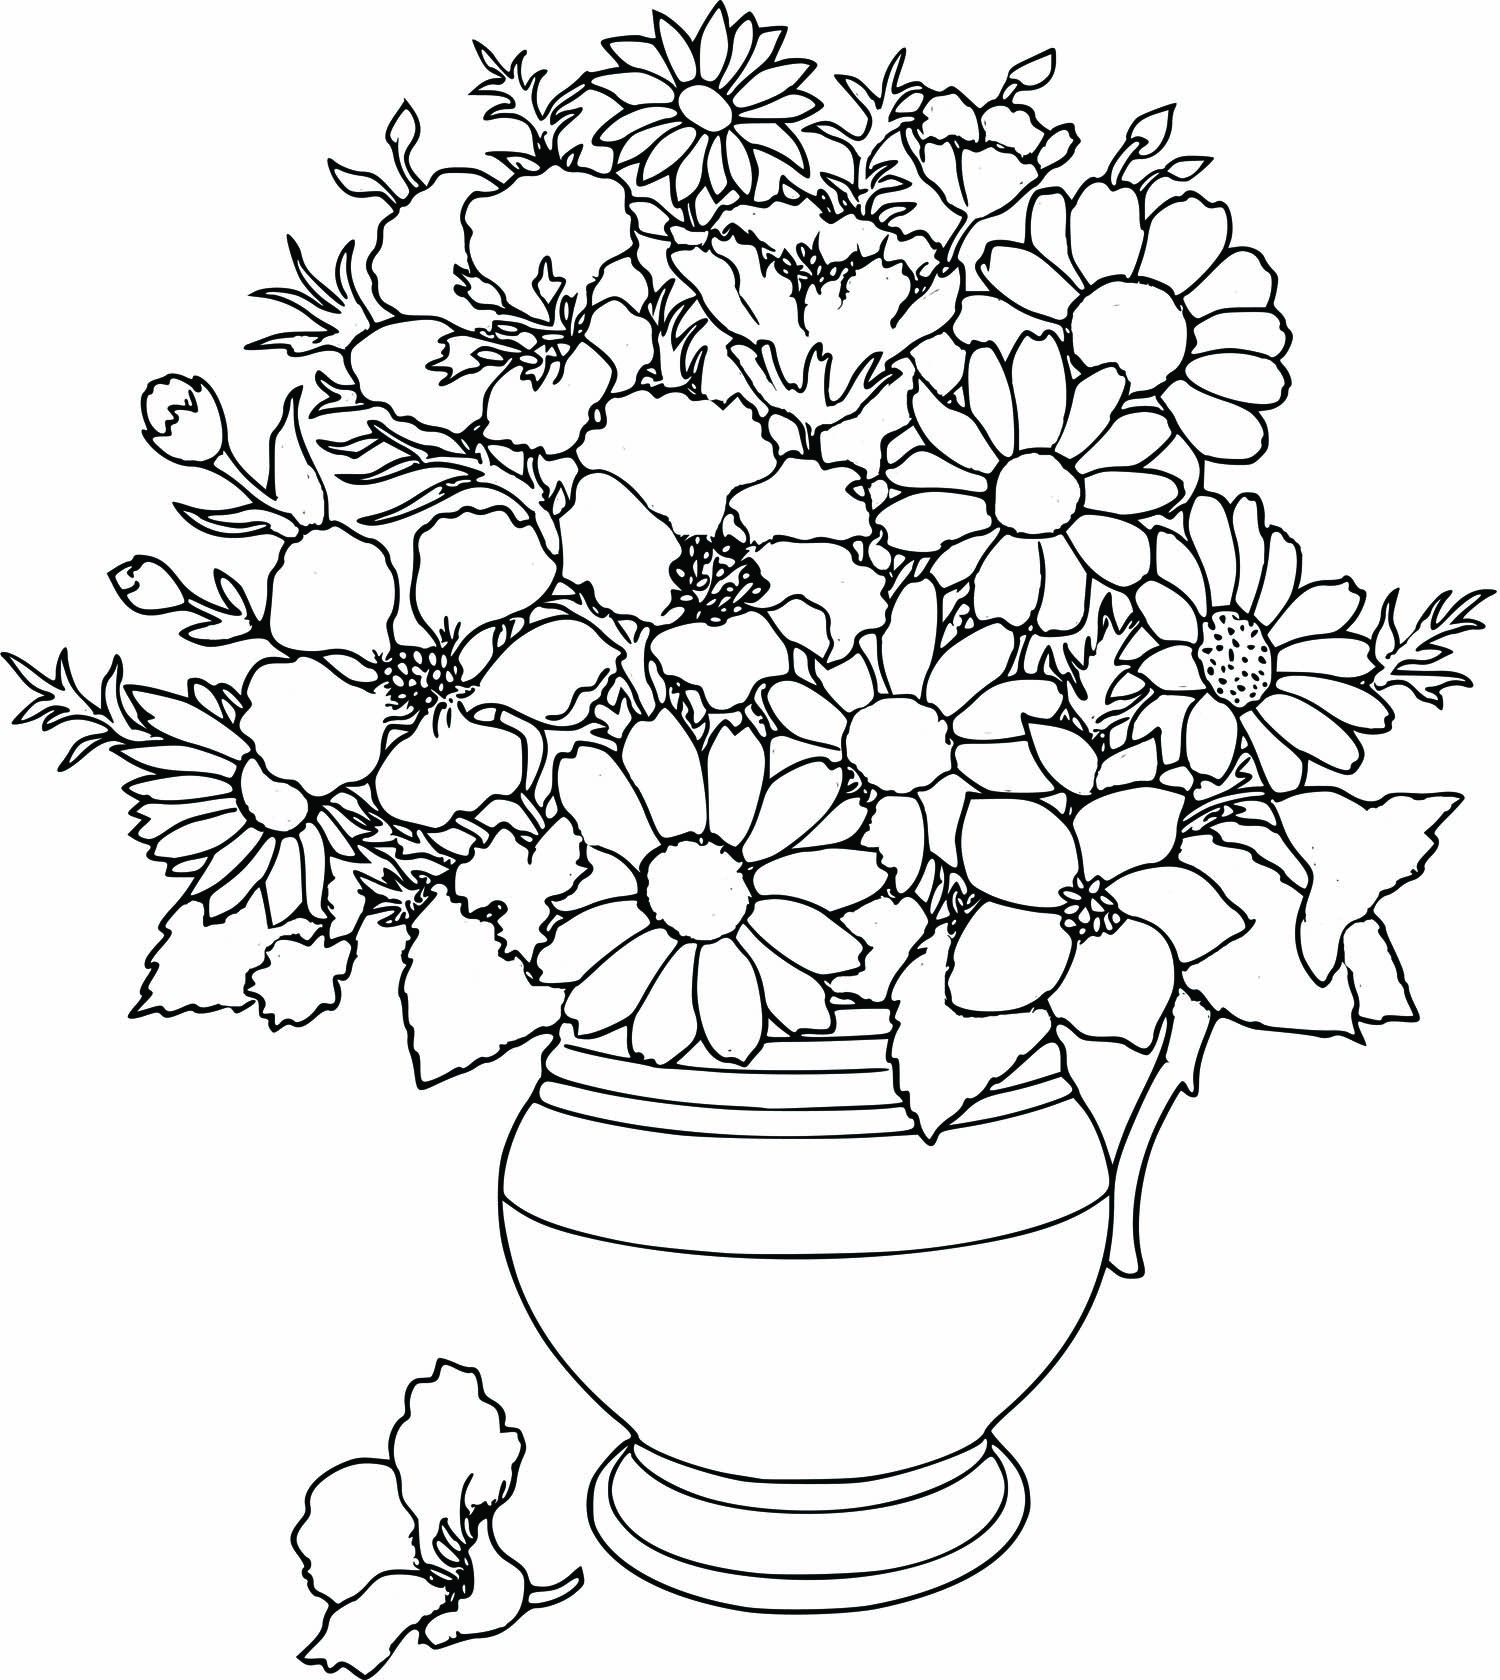 The most beautiful flower vase coloring page